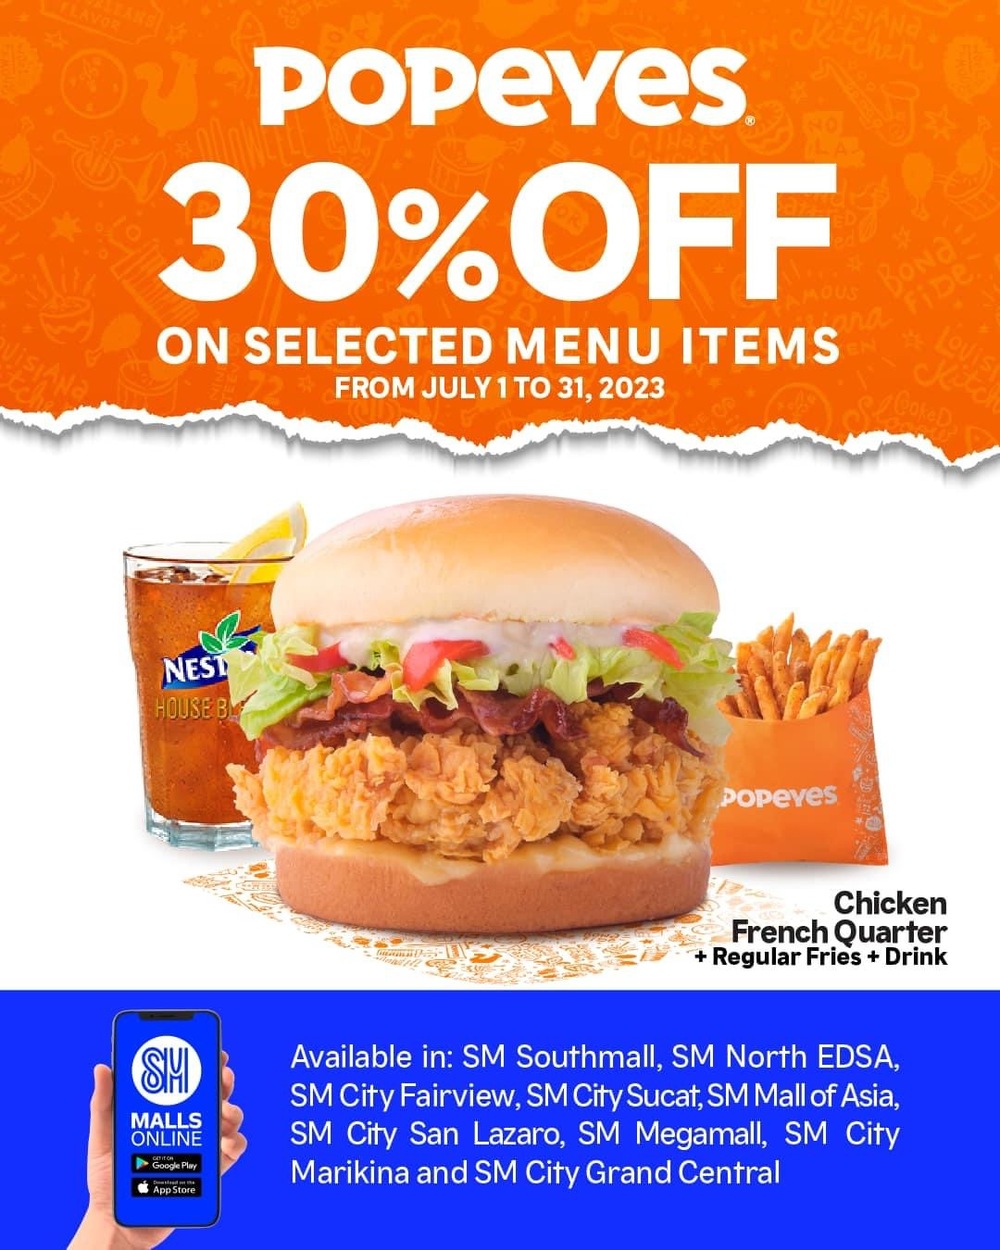 Awesome chicken deals and promos this National Fried Chicken Day 2023 from Popeyes Philippines